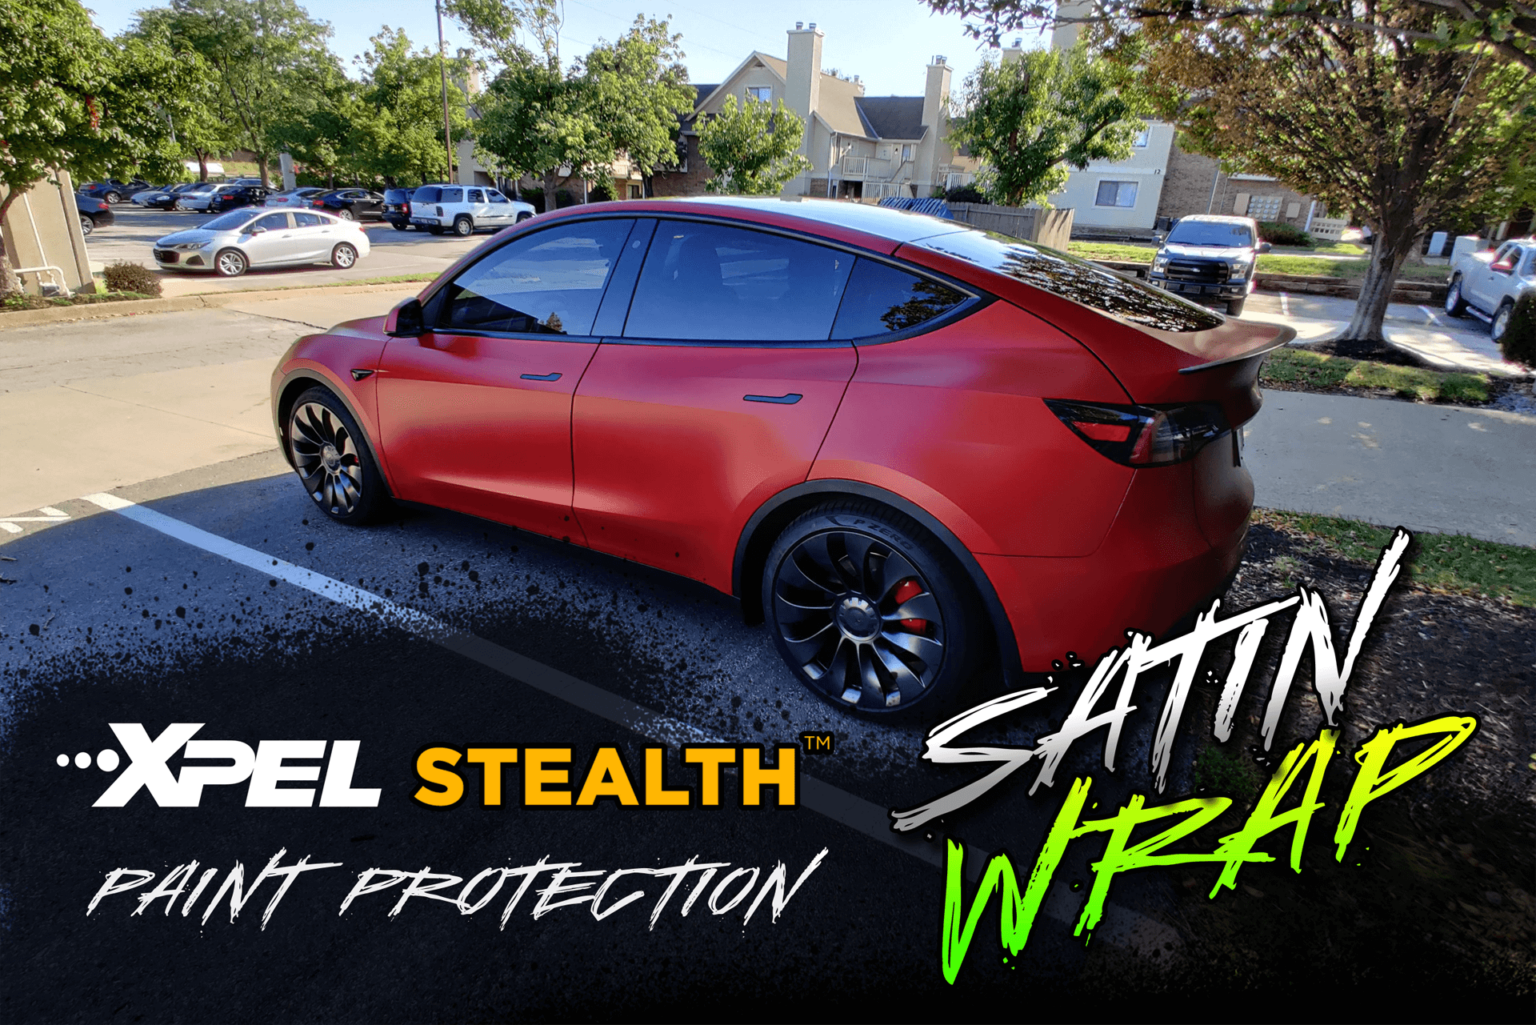 XPEL Stealth Paint Protection Film Overland Park KS